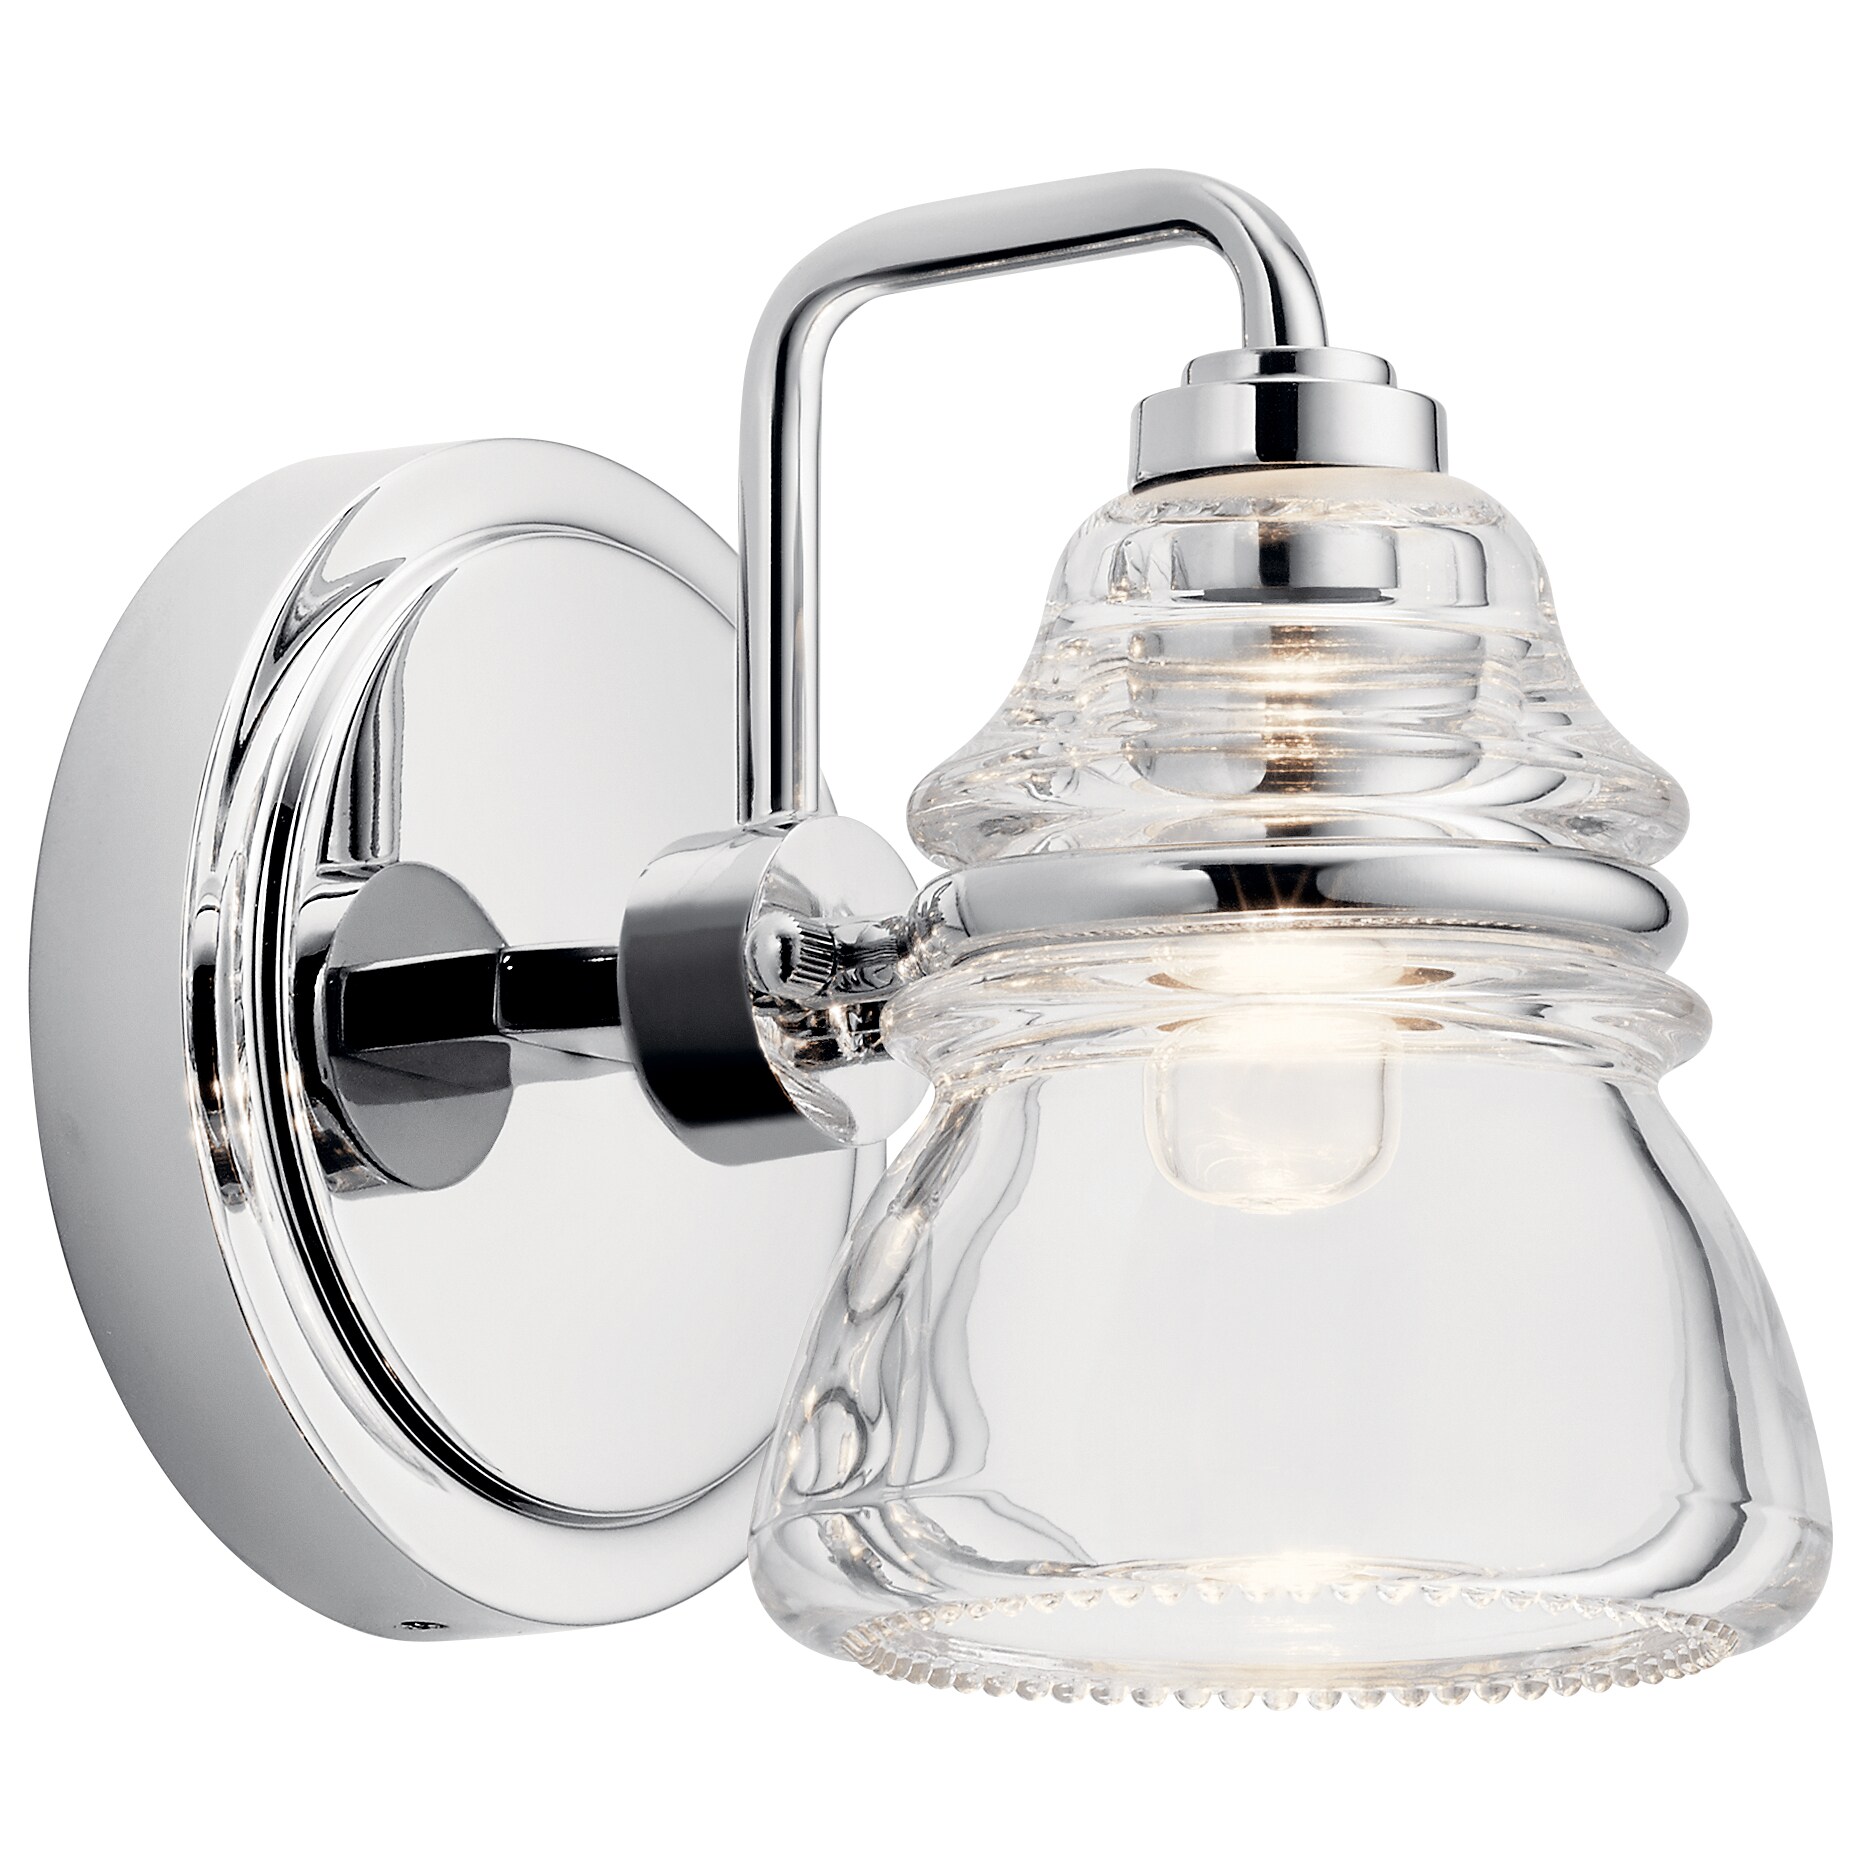 IN HOME Wall Sconce Light Chrome Finish with Alabaster Glass Shade $69 